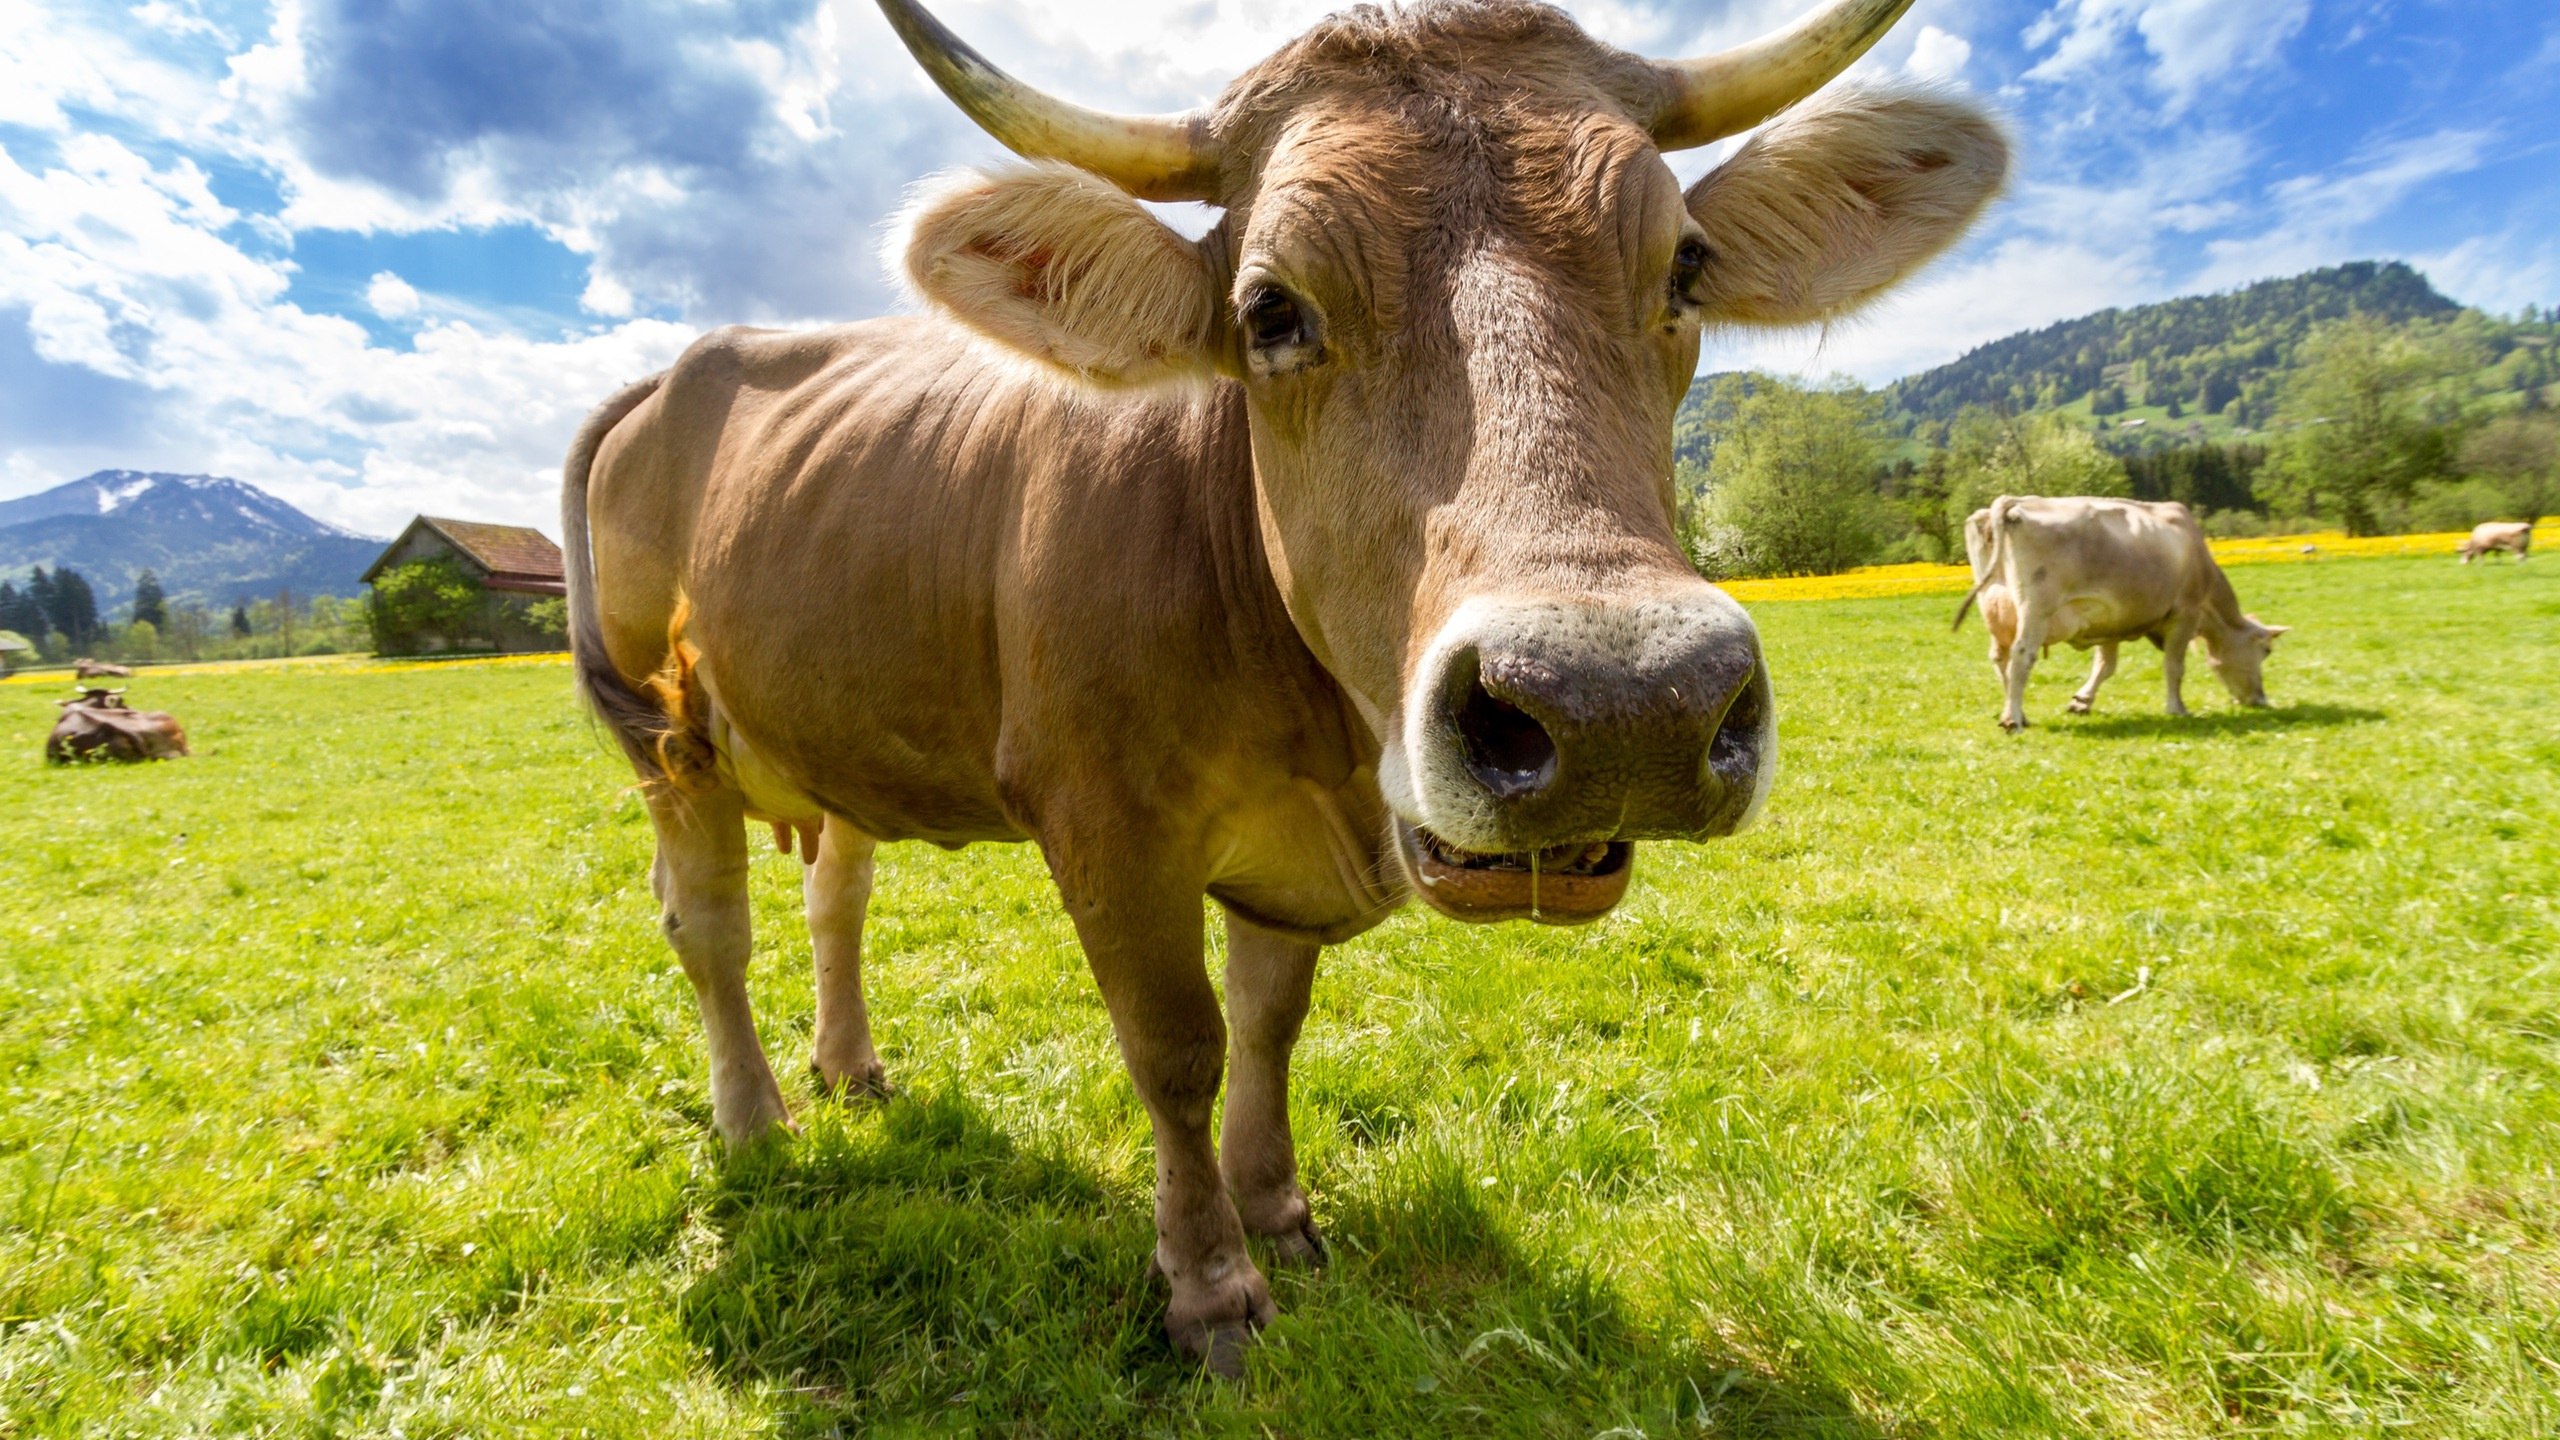 Brown Cow on Green Grass Field During Daytime. Wallpaper in 2560x1440 Resolution